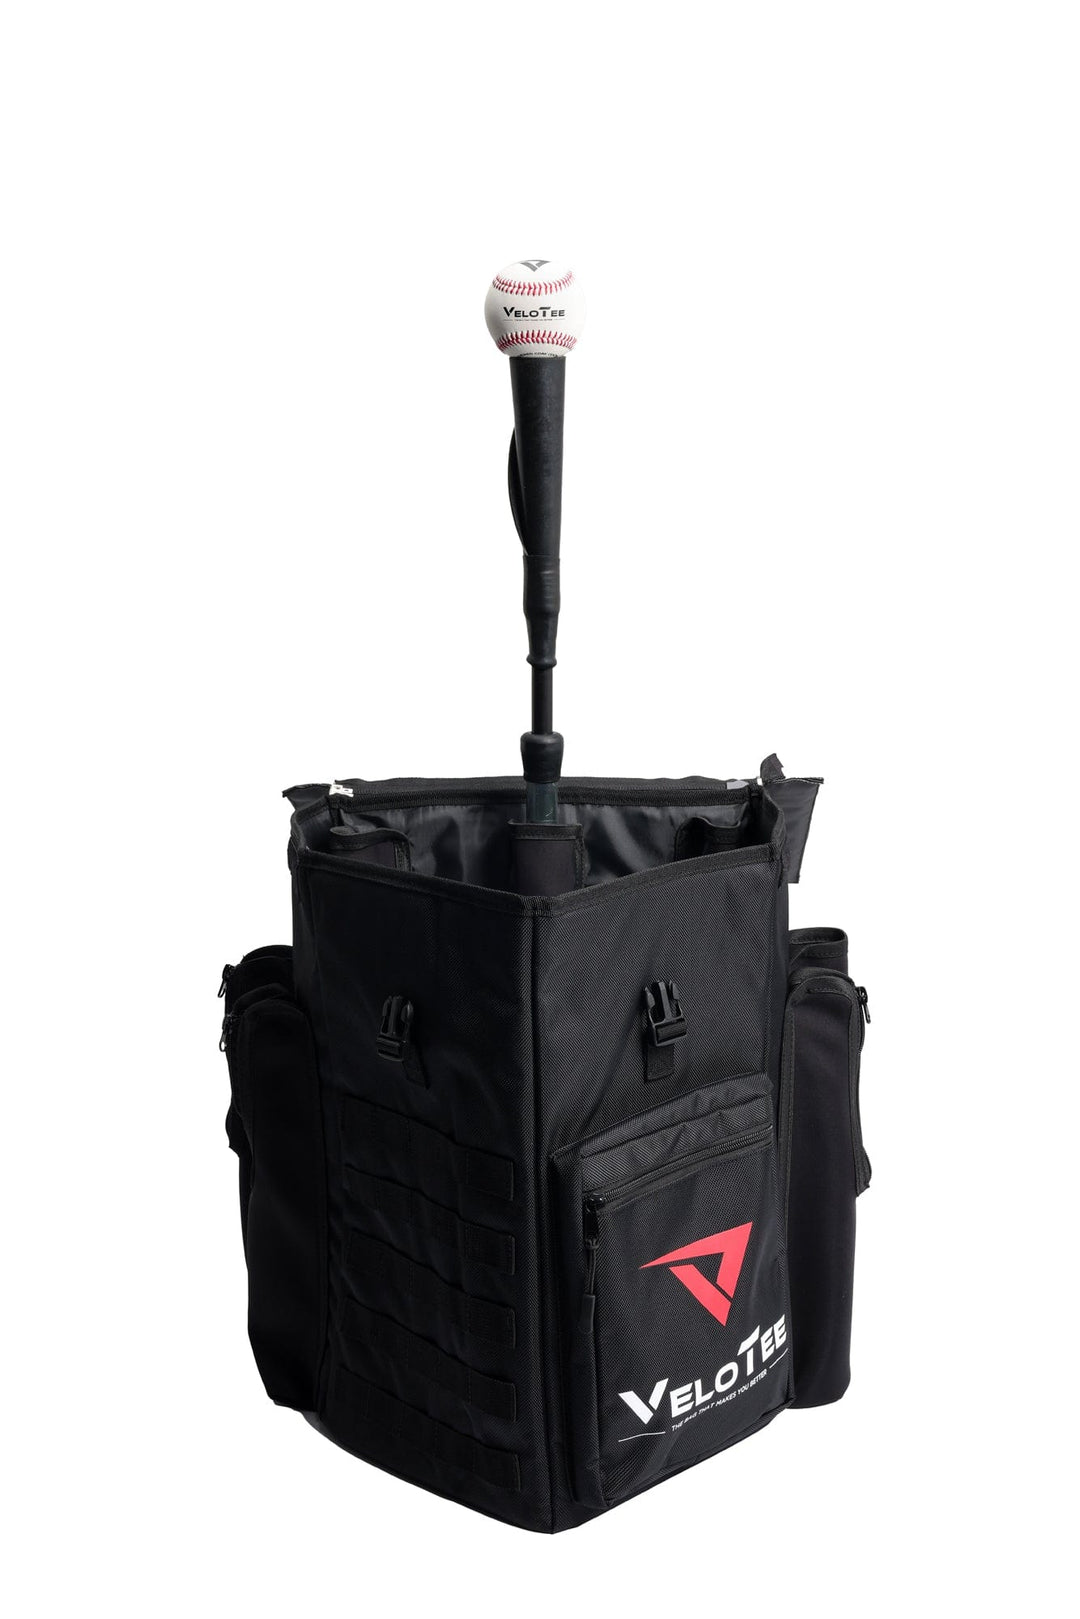 VeloTee Bat Bag Backpack VeloTee PRO Bundle with TANNER TEE